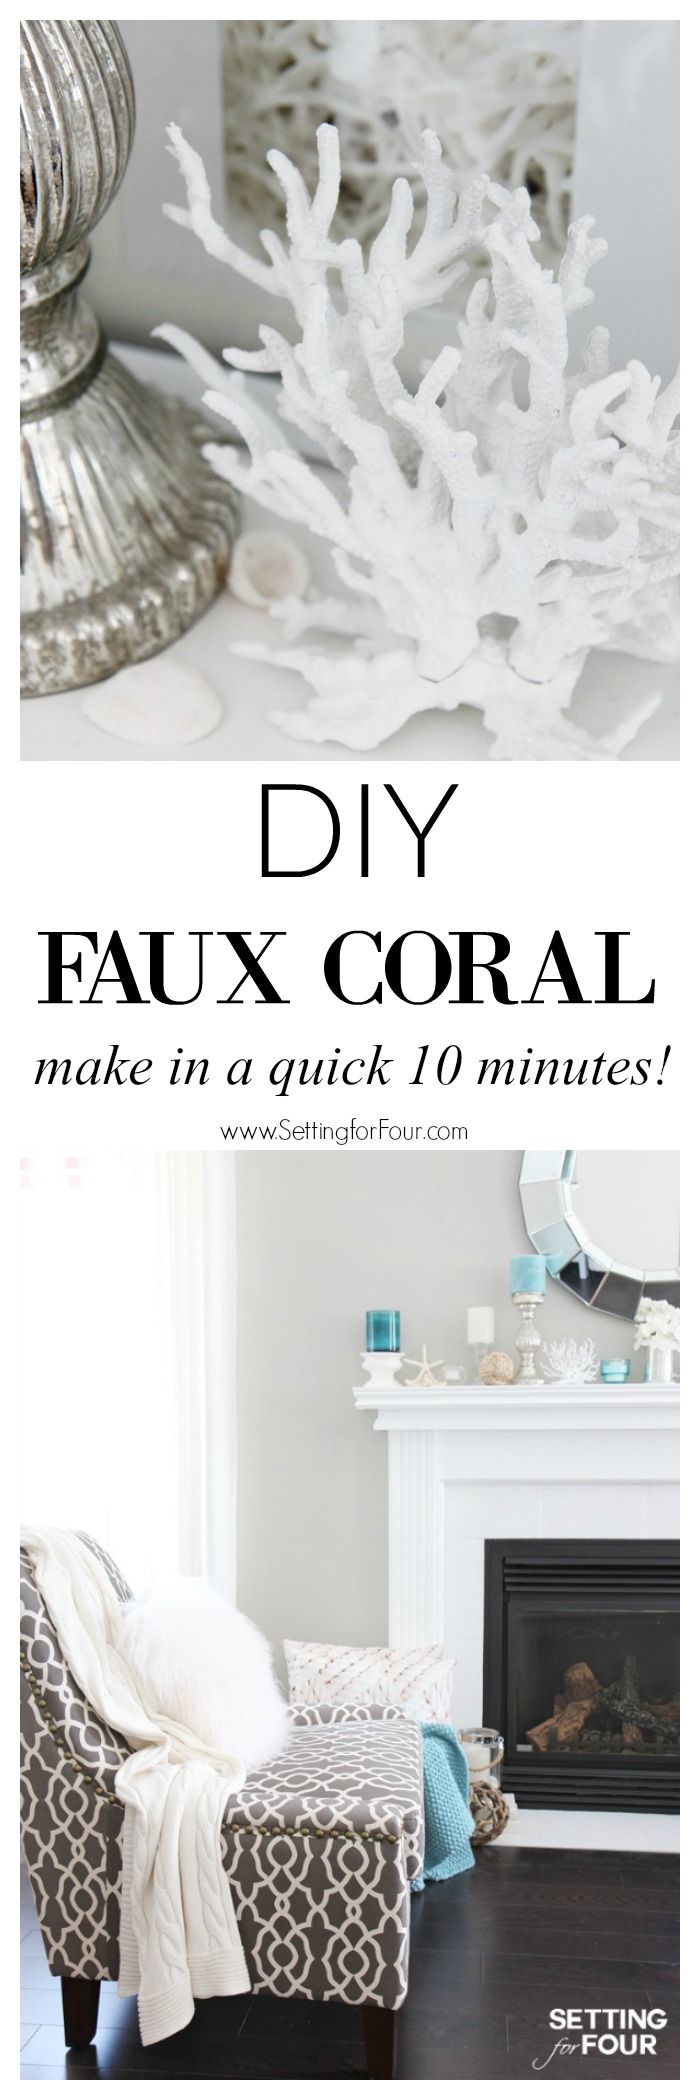 Make Faux Coral Inspired by Pottery Barn